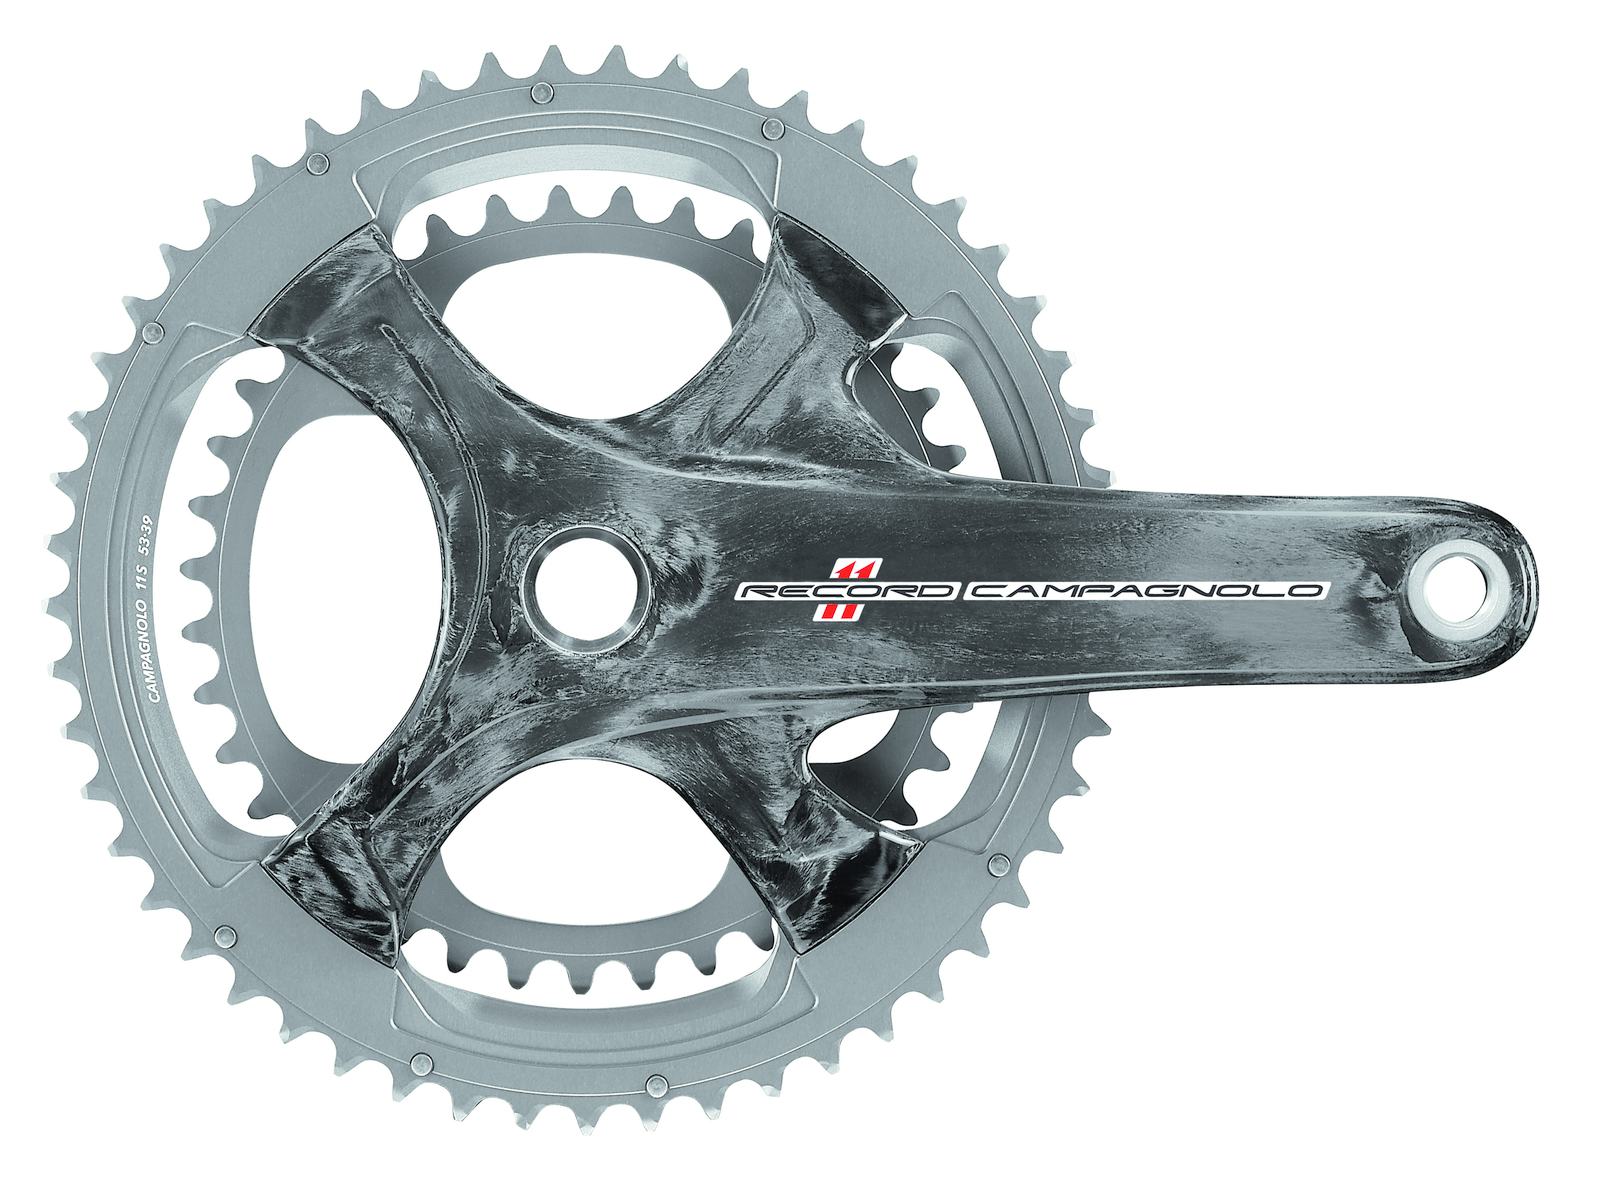 Campagnolo Upgrades Complete Mechanical Lineup and New Hi-End Wheels